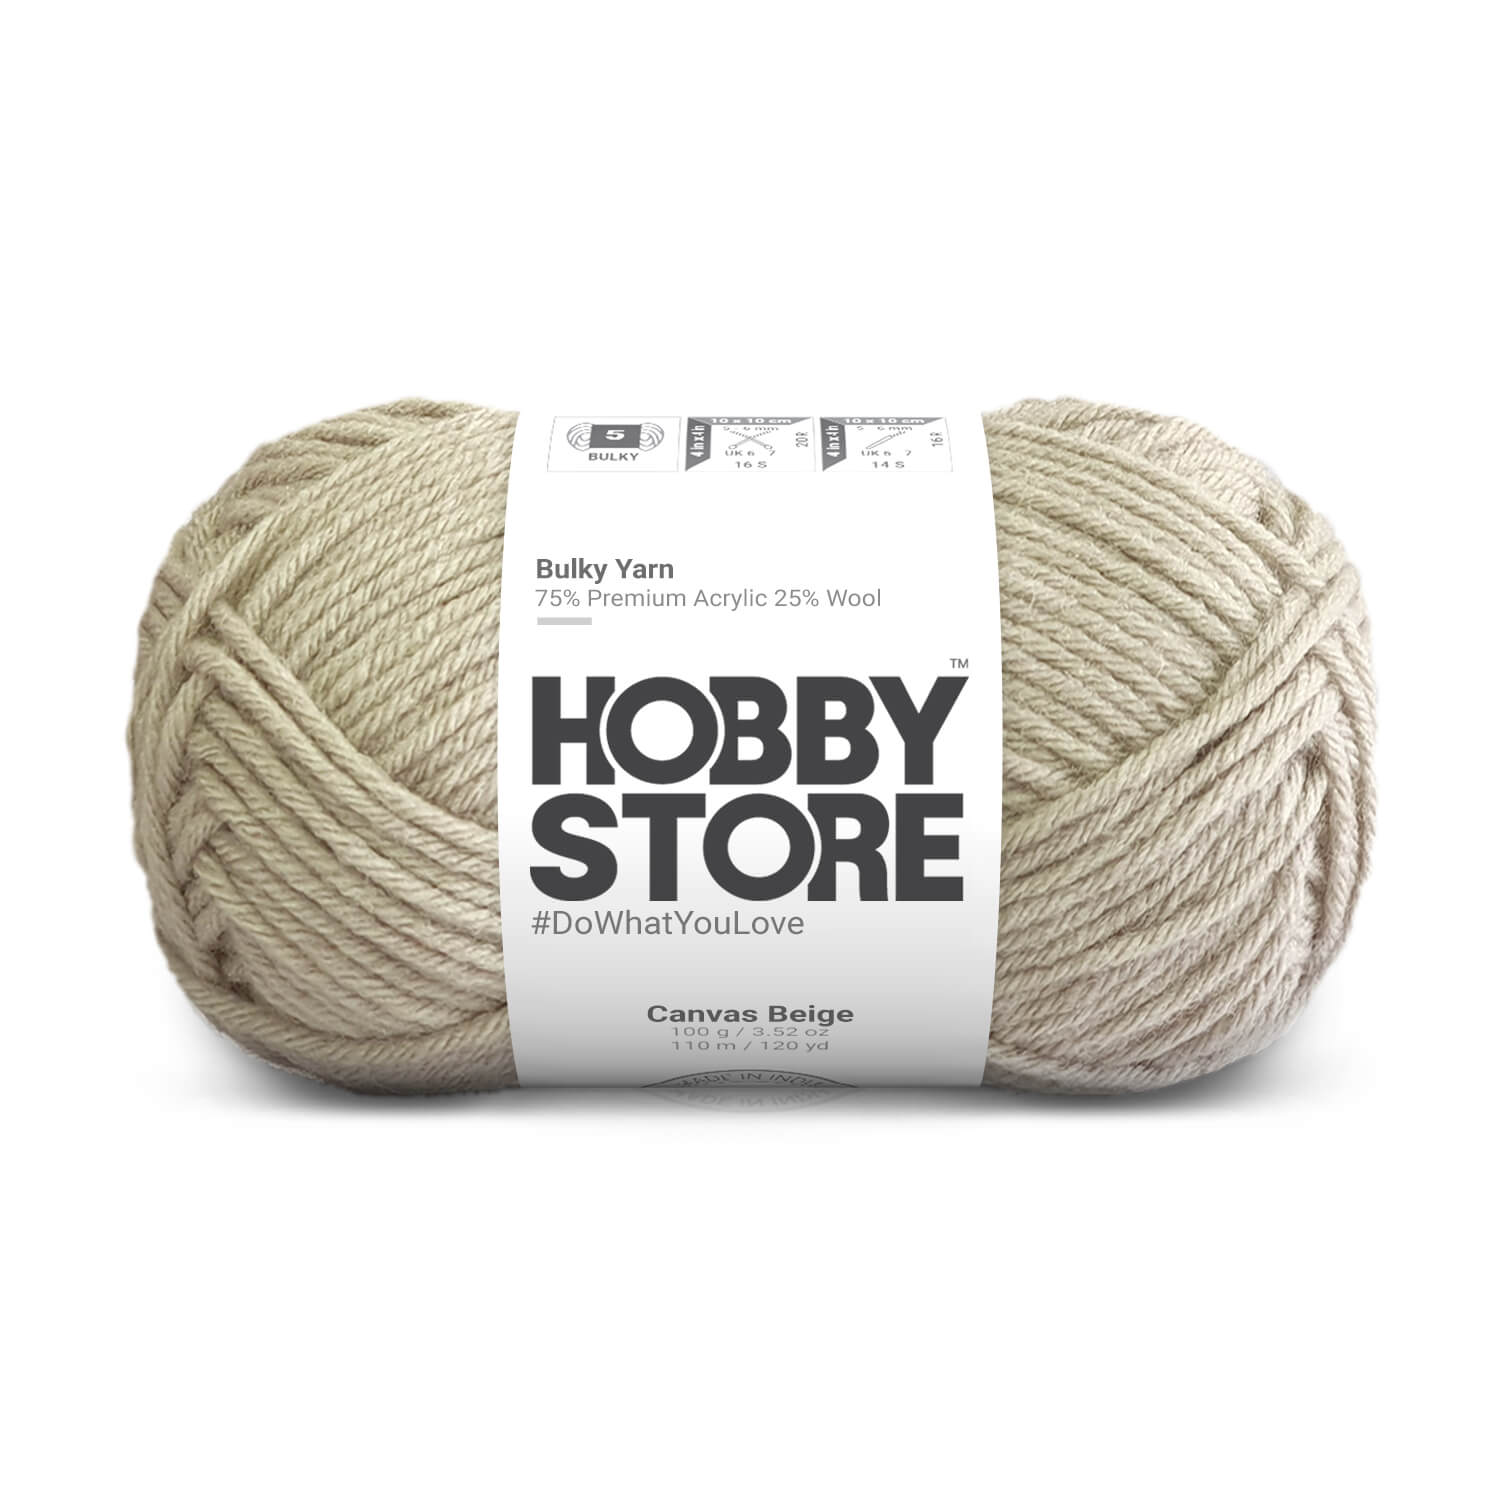 Bulky Yarn by Hobby Store - Canvas Beige 6017